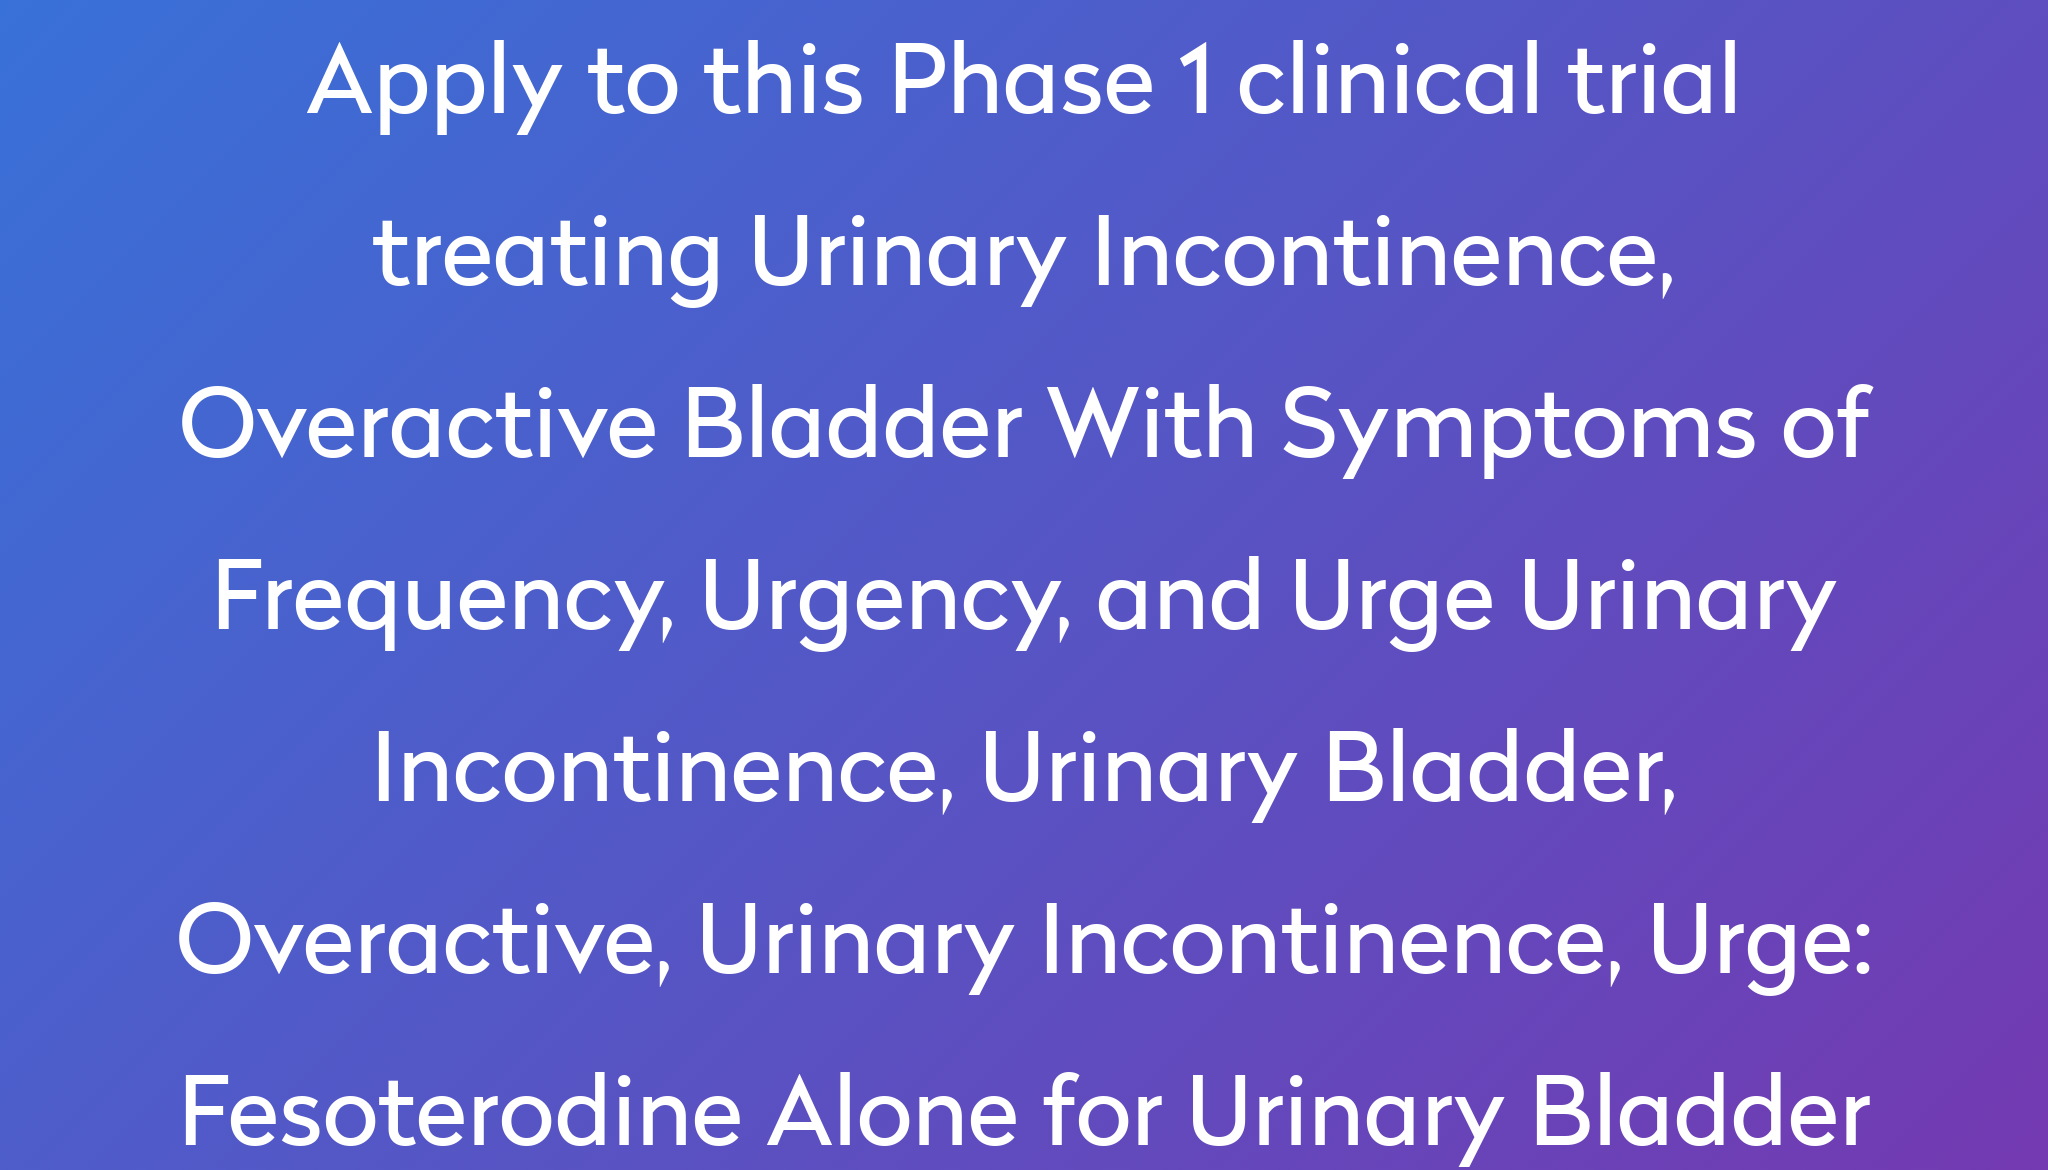 Fesoterodine Alone for Urinary Bladder Clinical Trial 2022 | Power